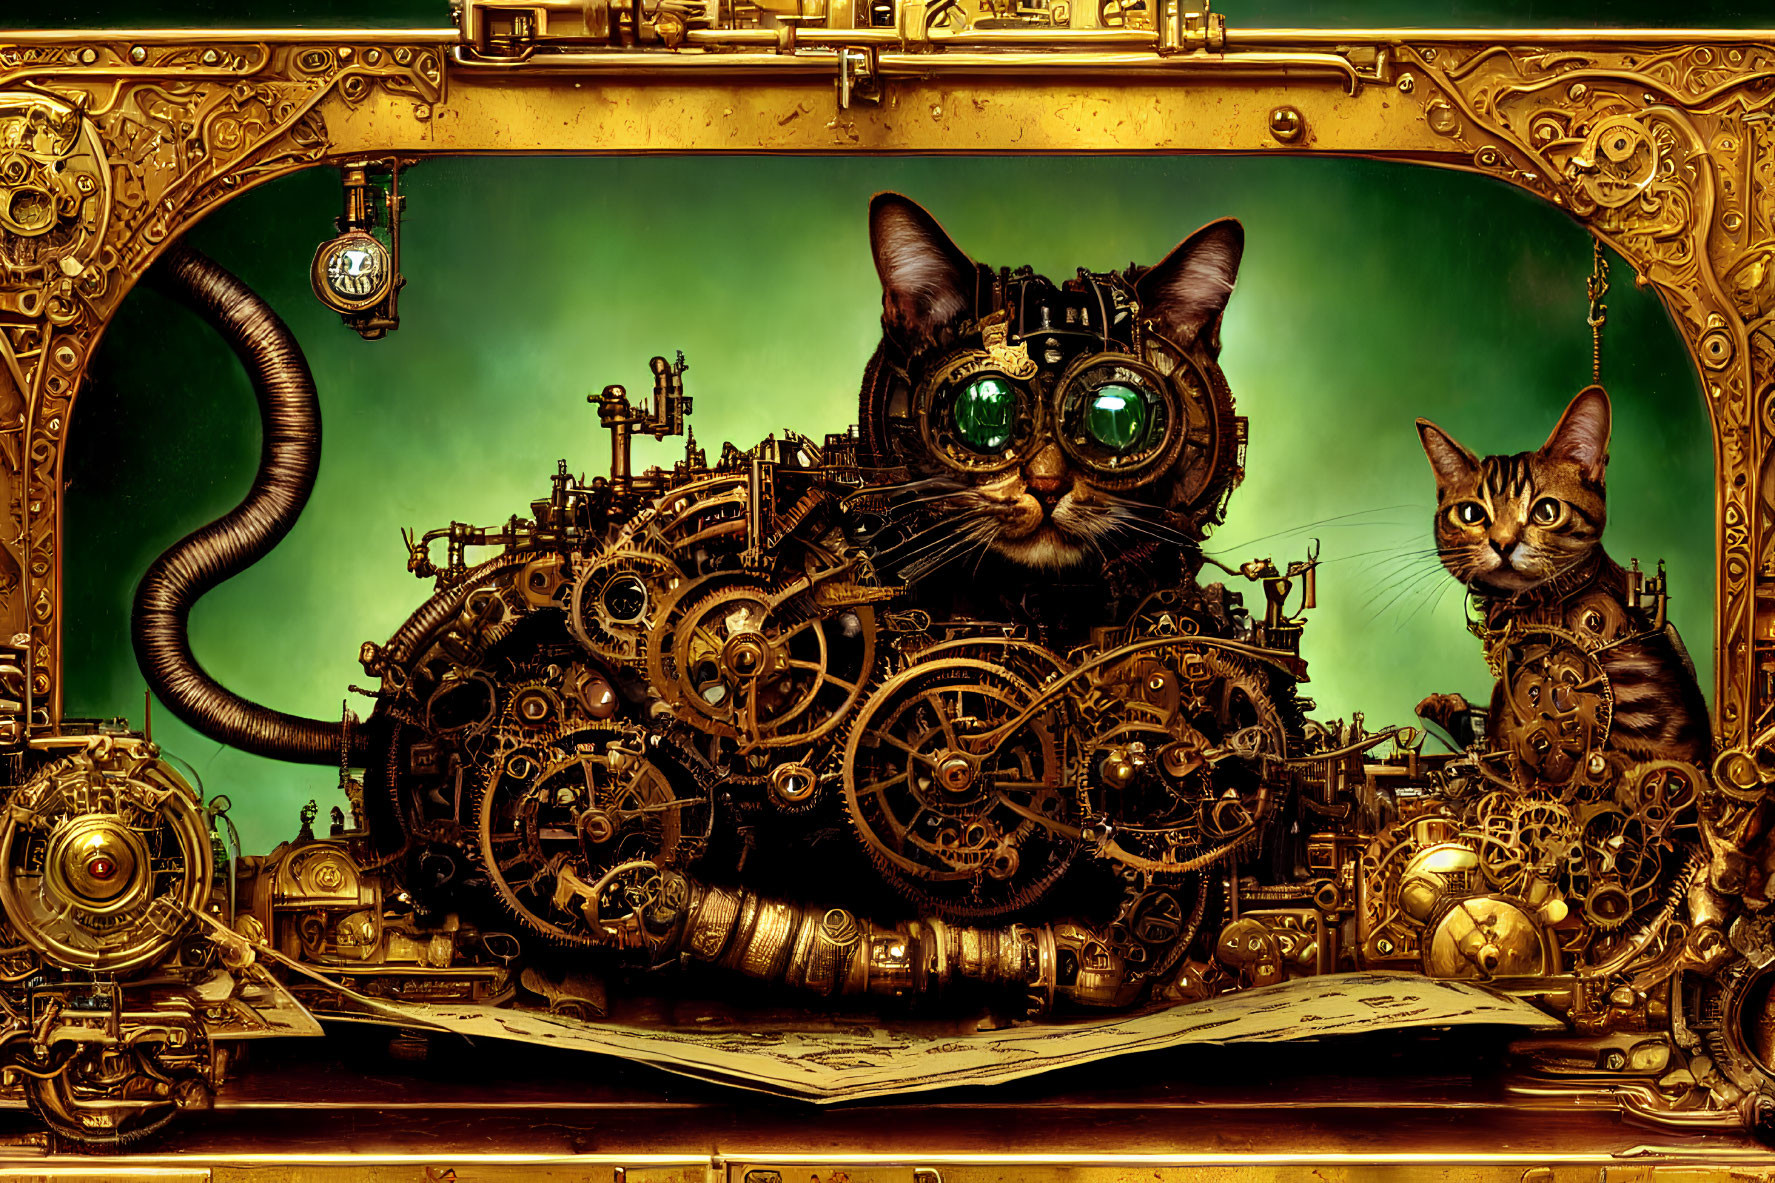 Steampunk-style illustration of two cats in mechanical bodies in vintage frame with gears and cogs.